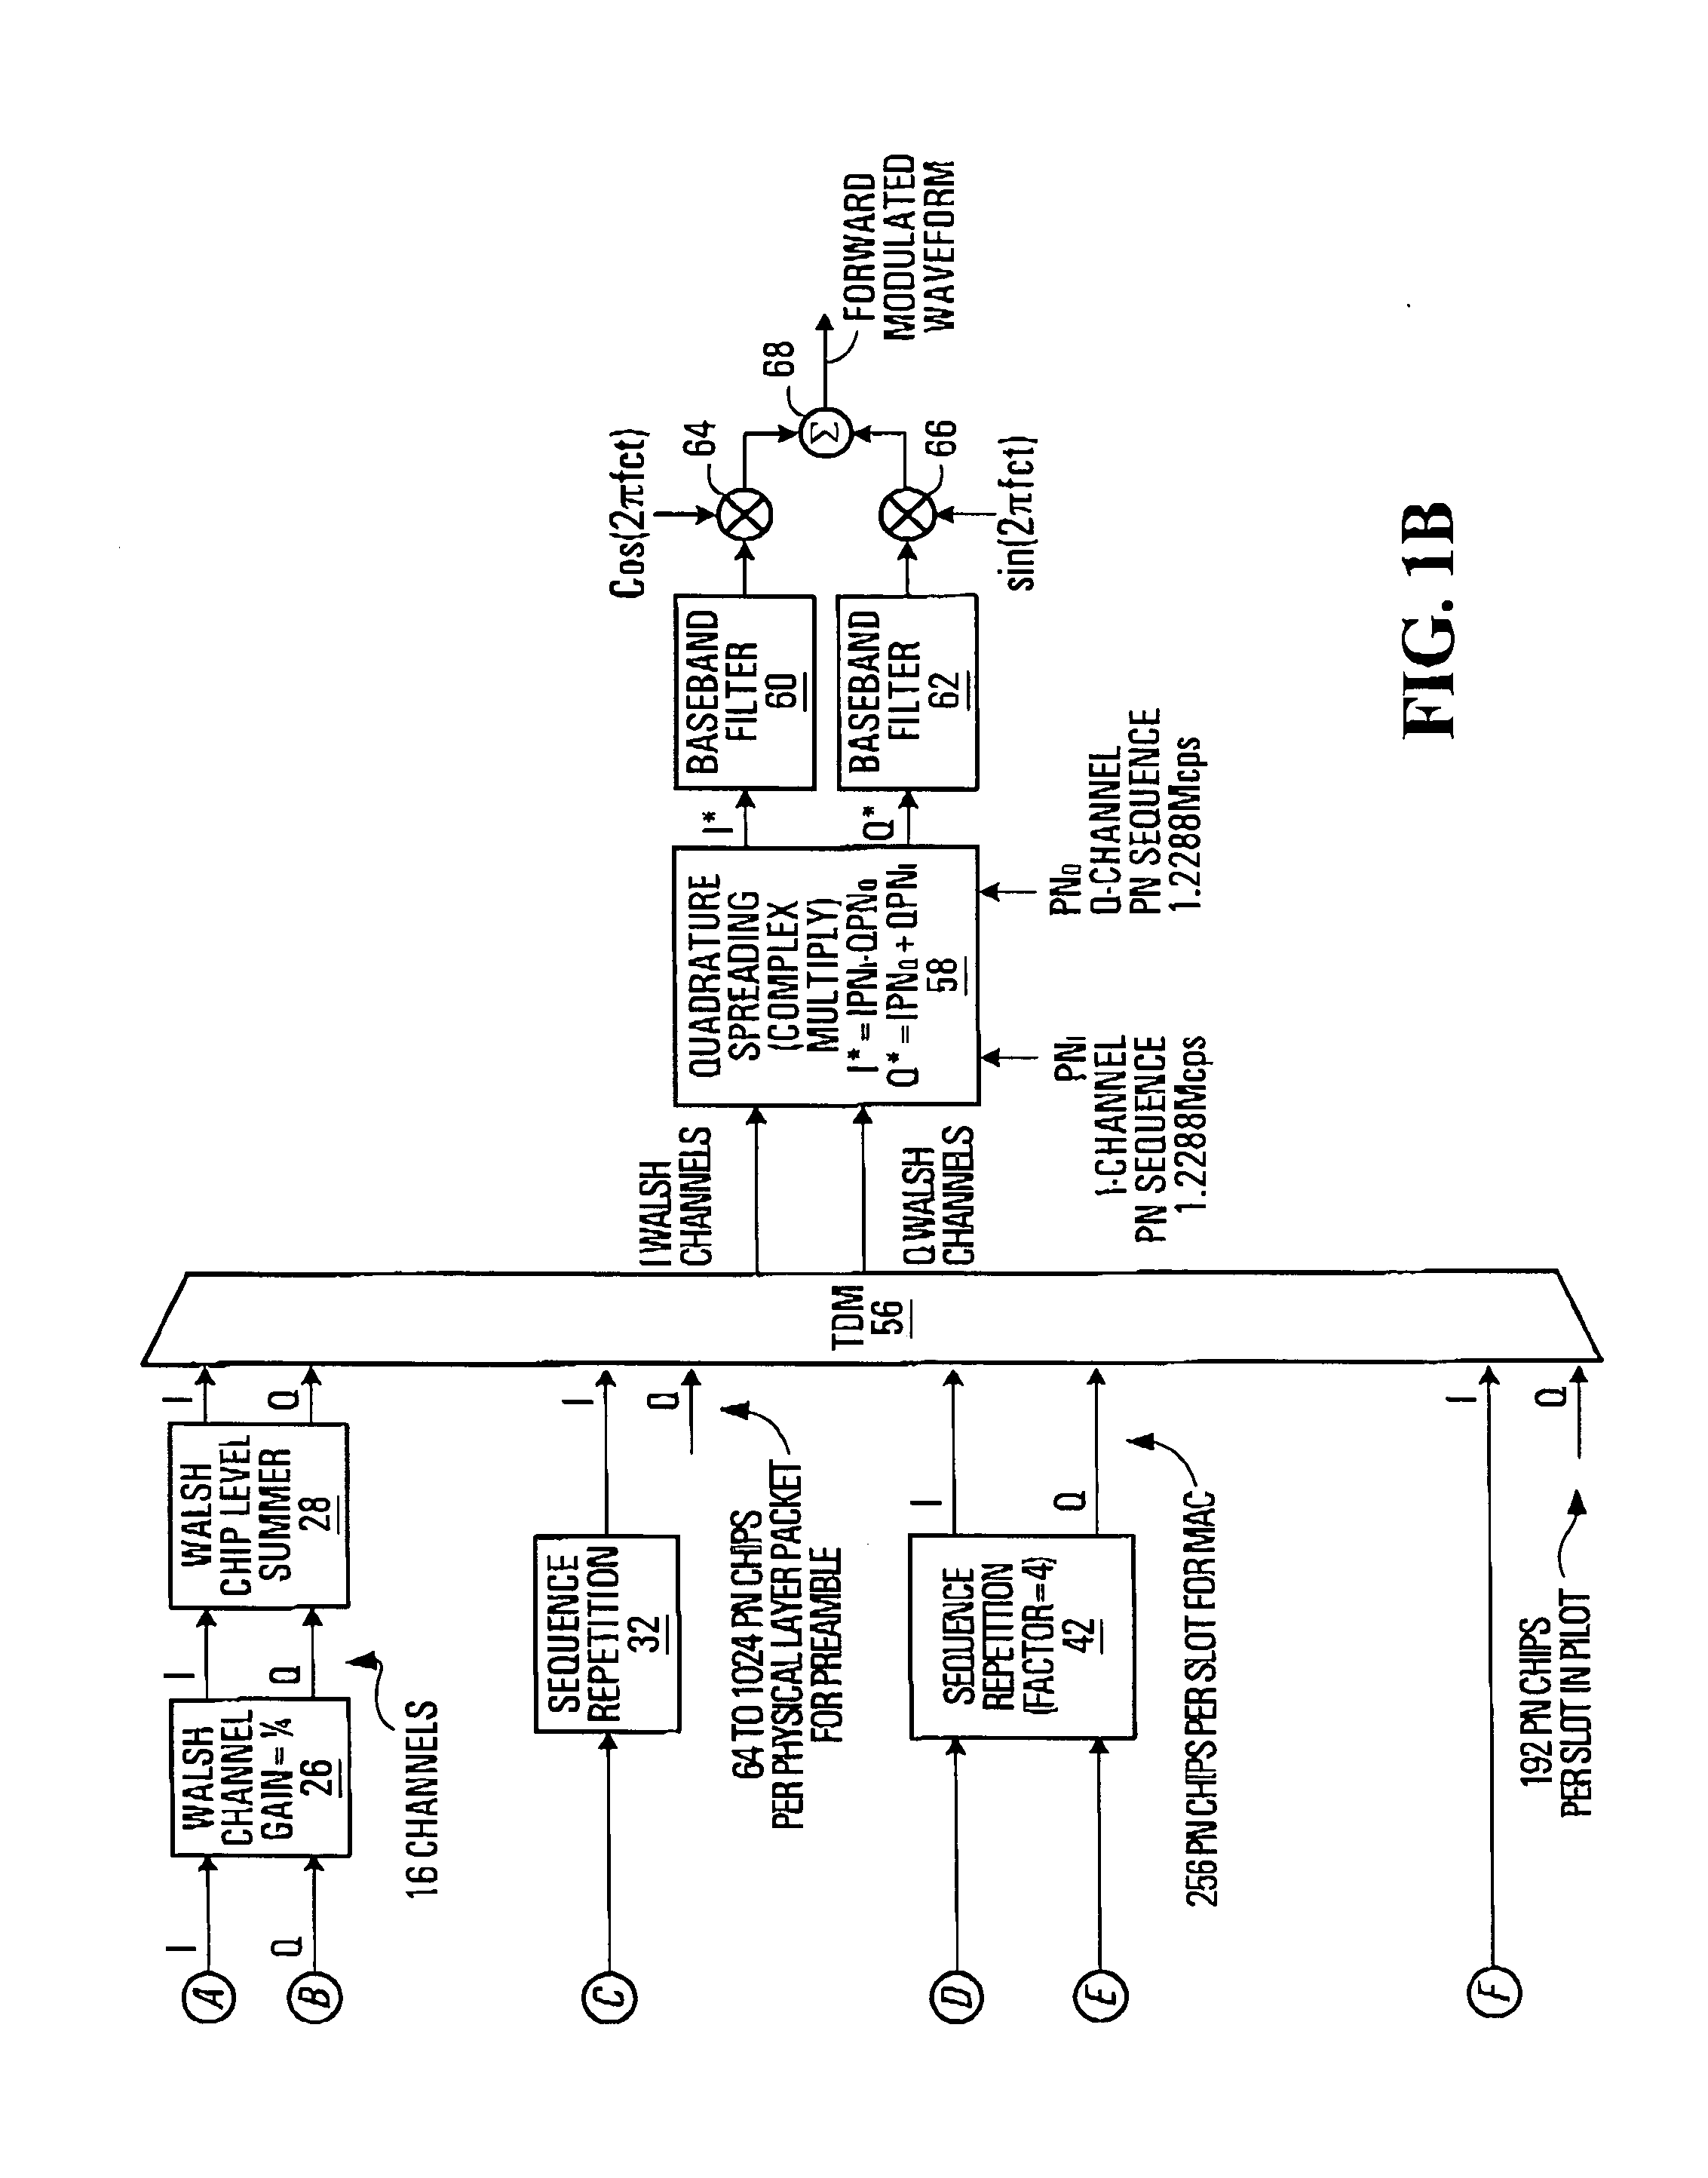 Communication signal equalization systems and methods